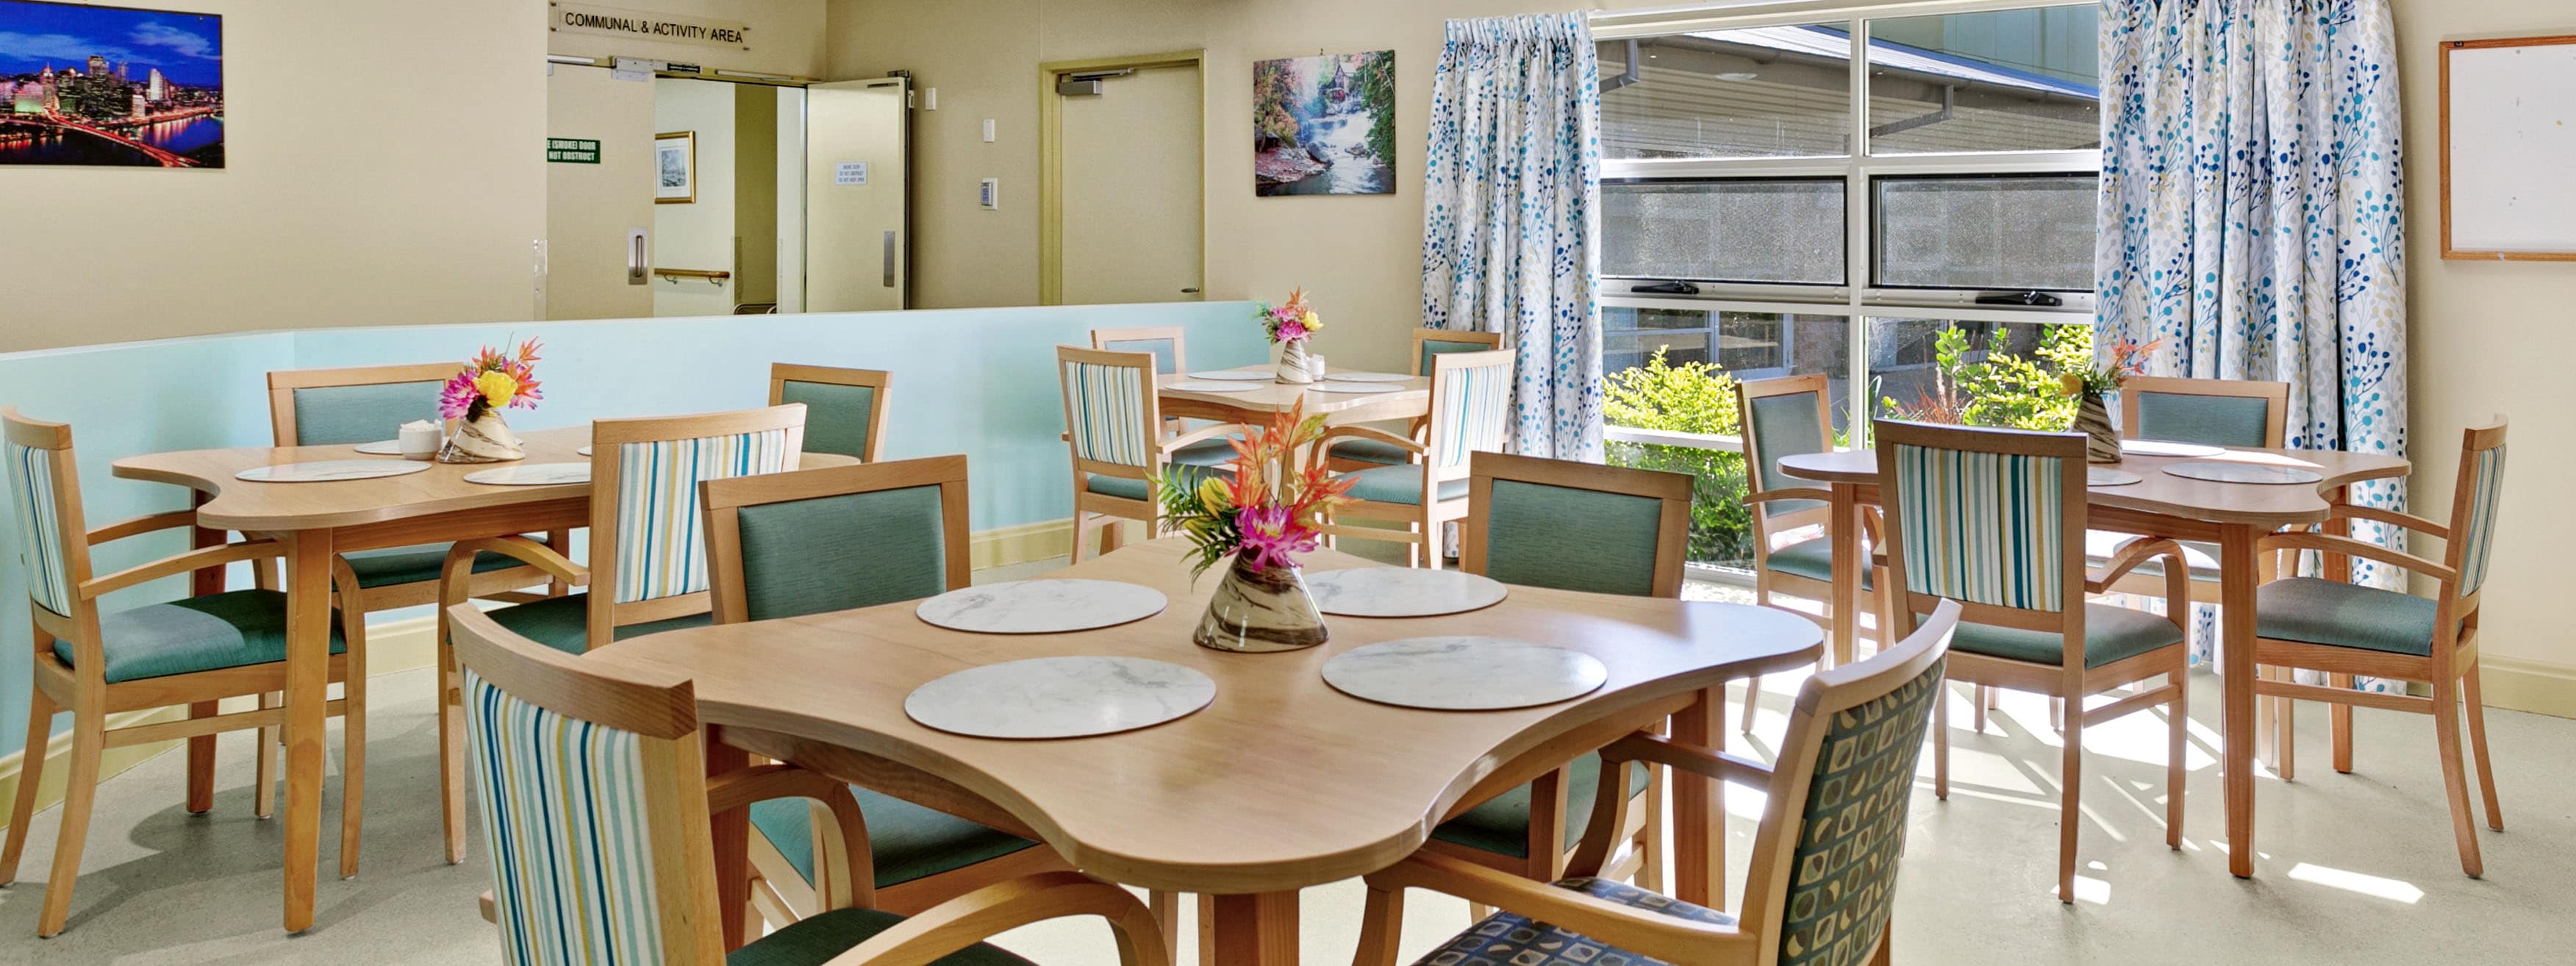 Anglican Care_Warnervale Gardens_dining